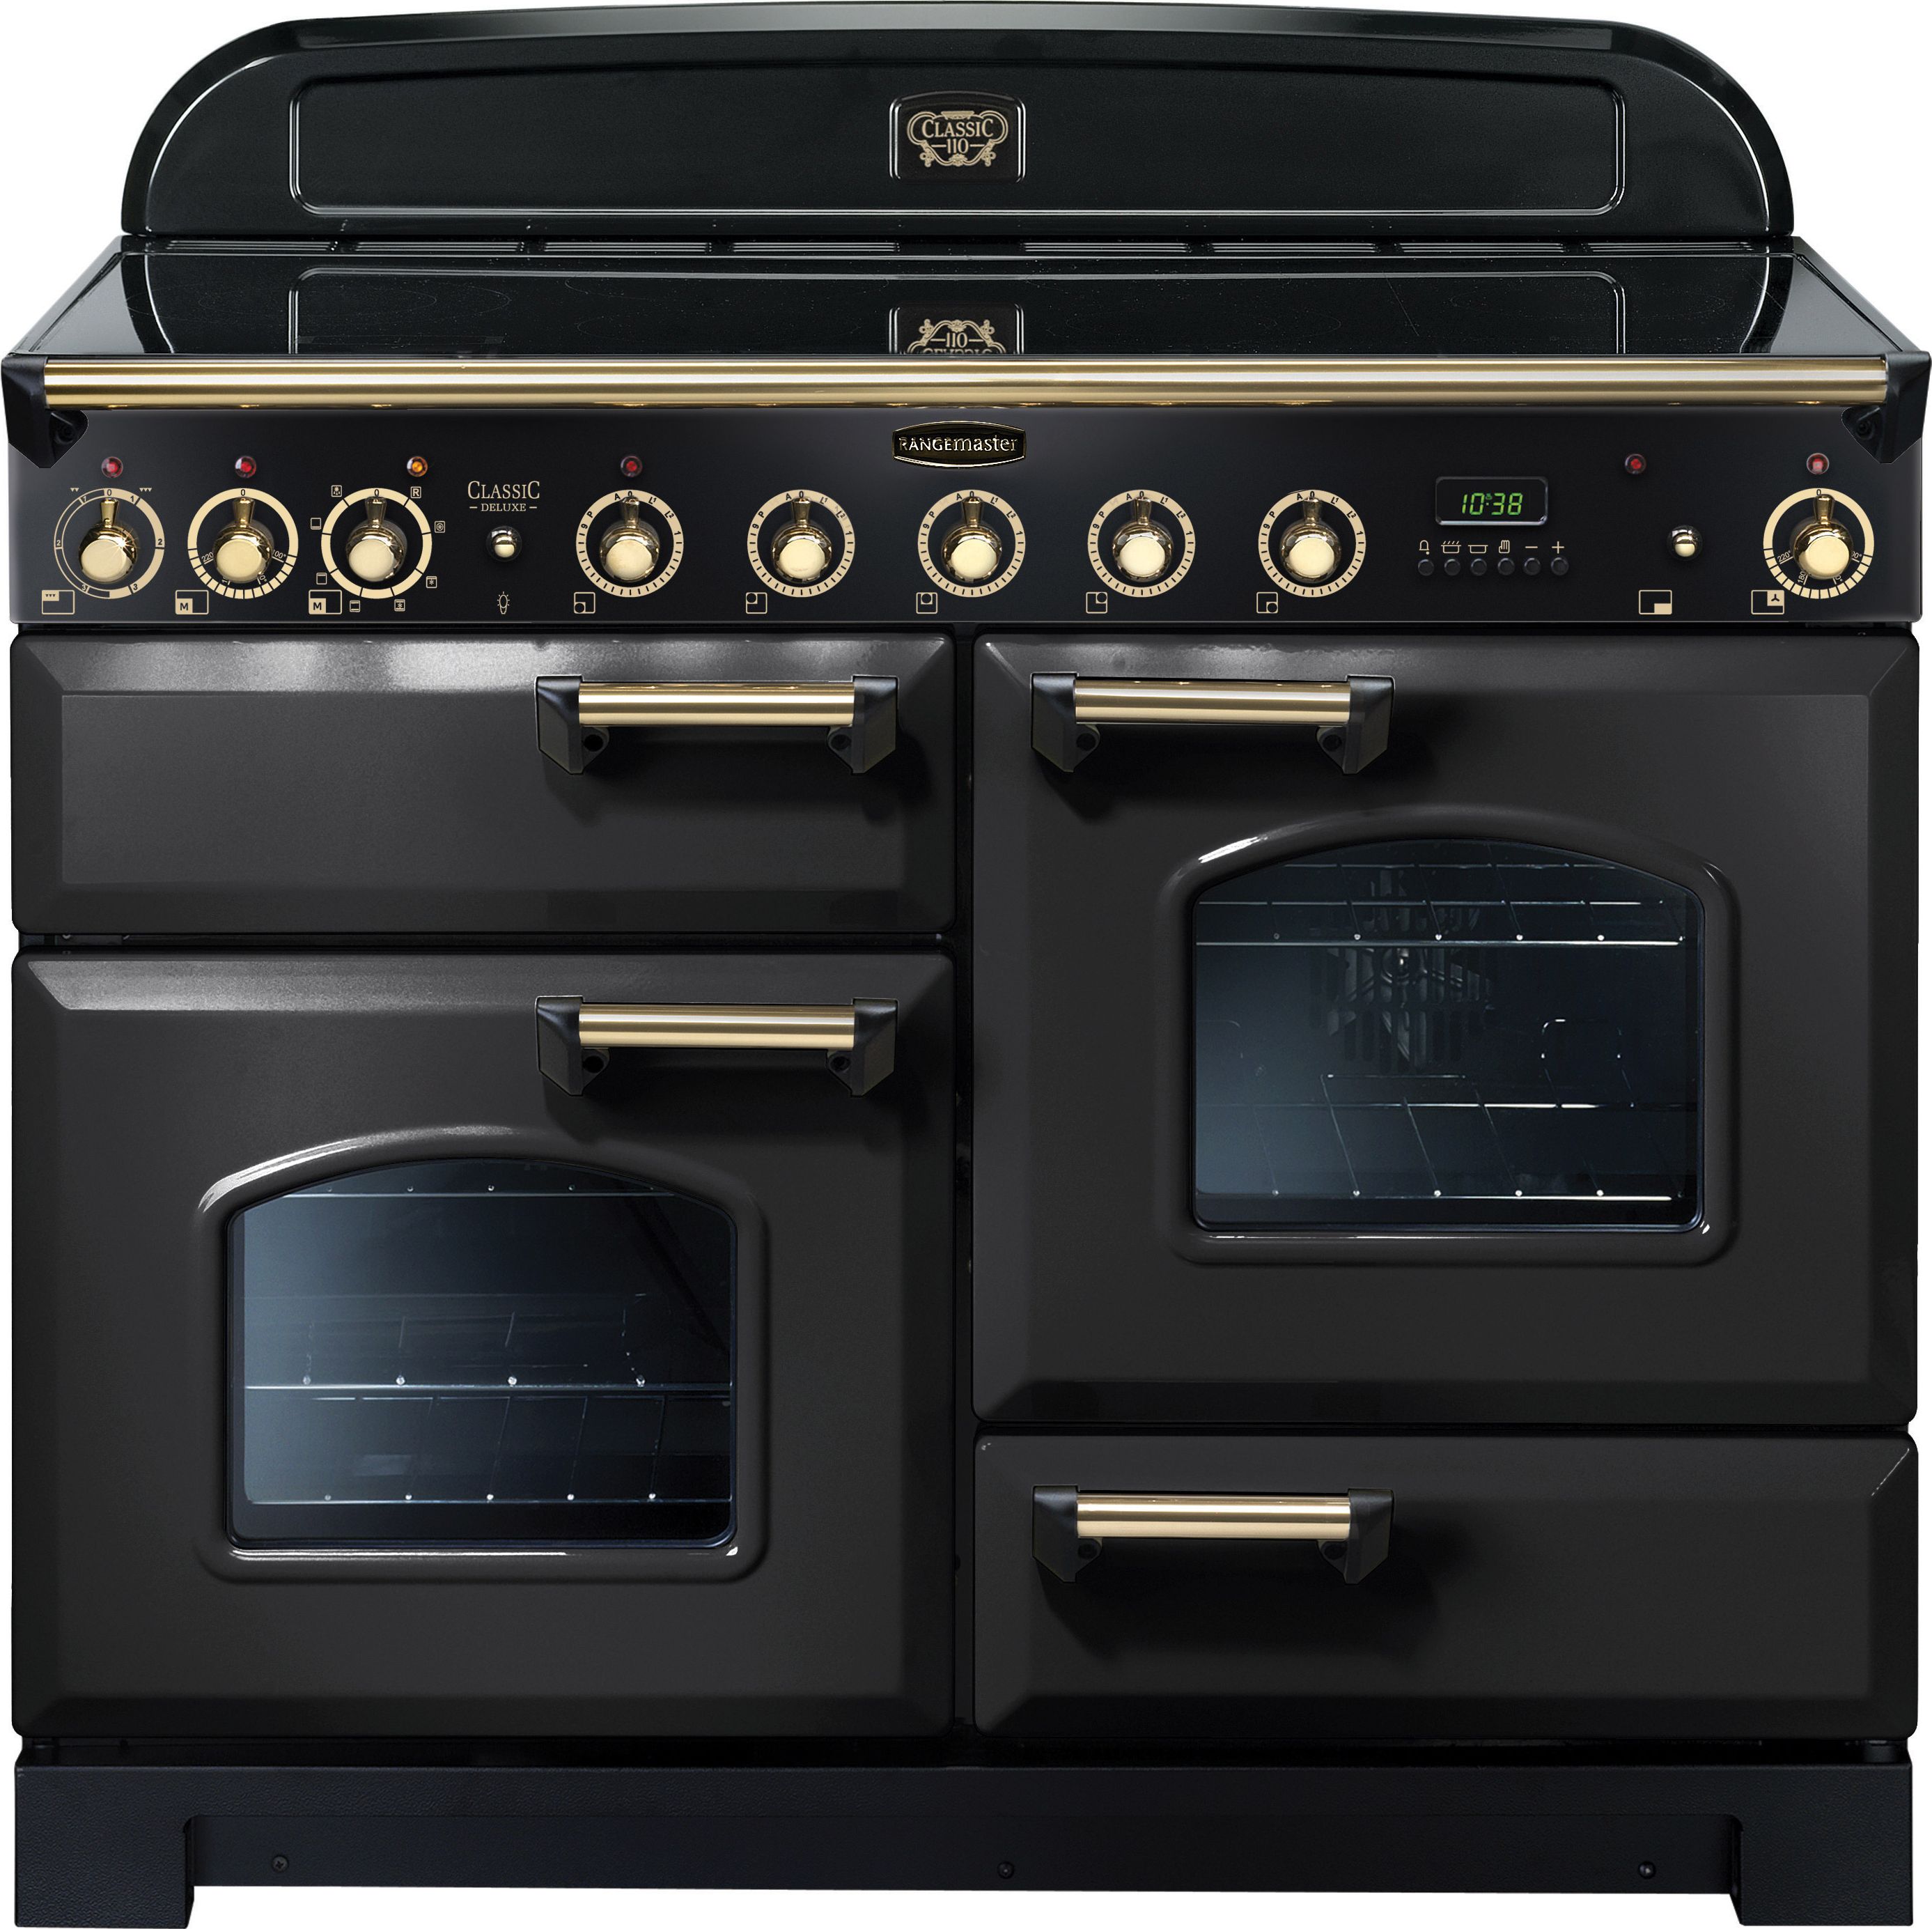 Rangemaster Classic Deluxe CDL110EICB/B 110cm Electric Range Cooker with Induction Hob - Charcoal Black / Brass - A/A Rated, Black